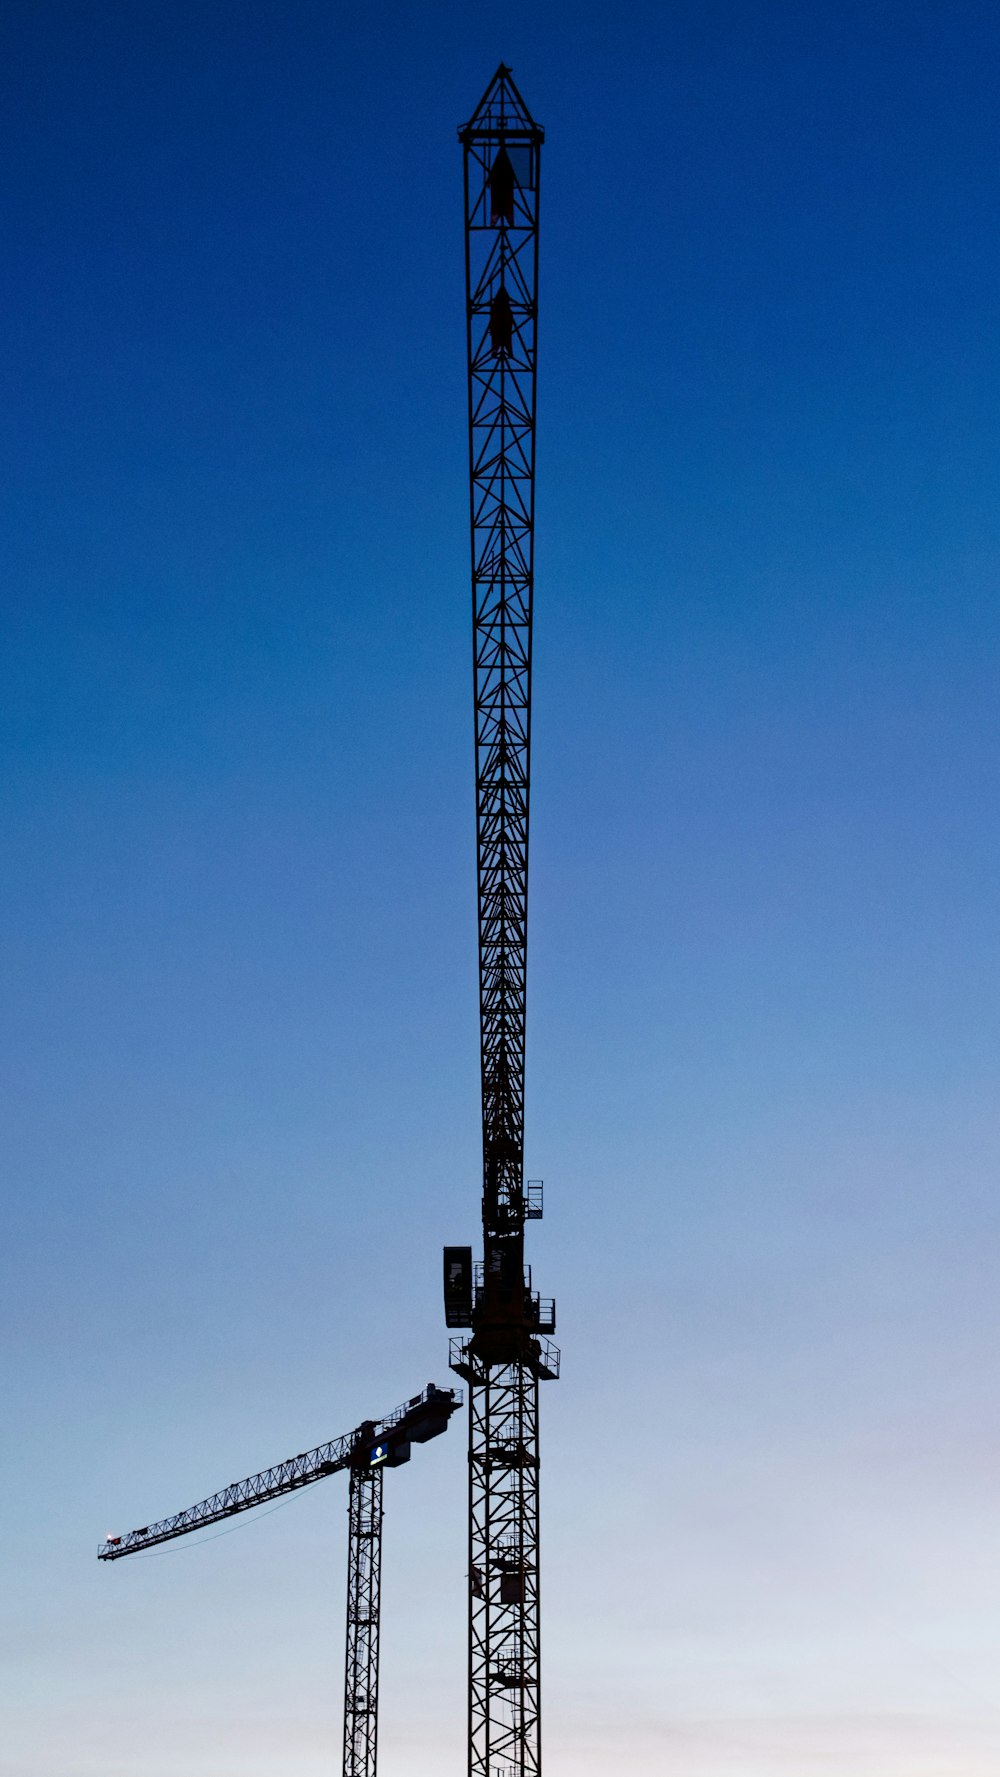 a tower crane is silhouetted against a blue sky